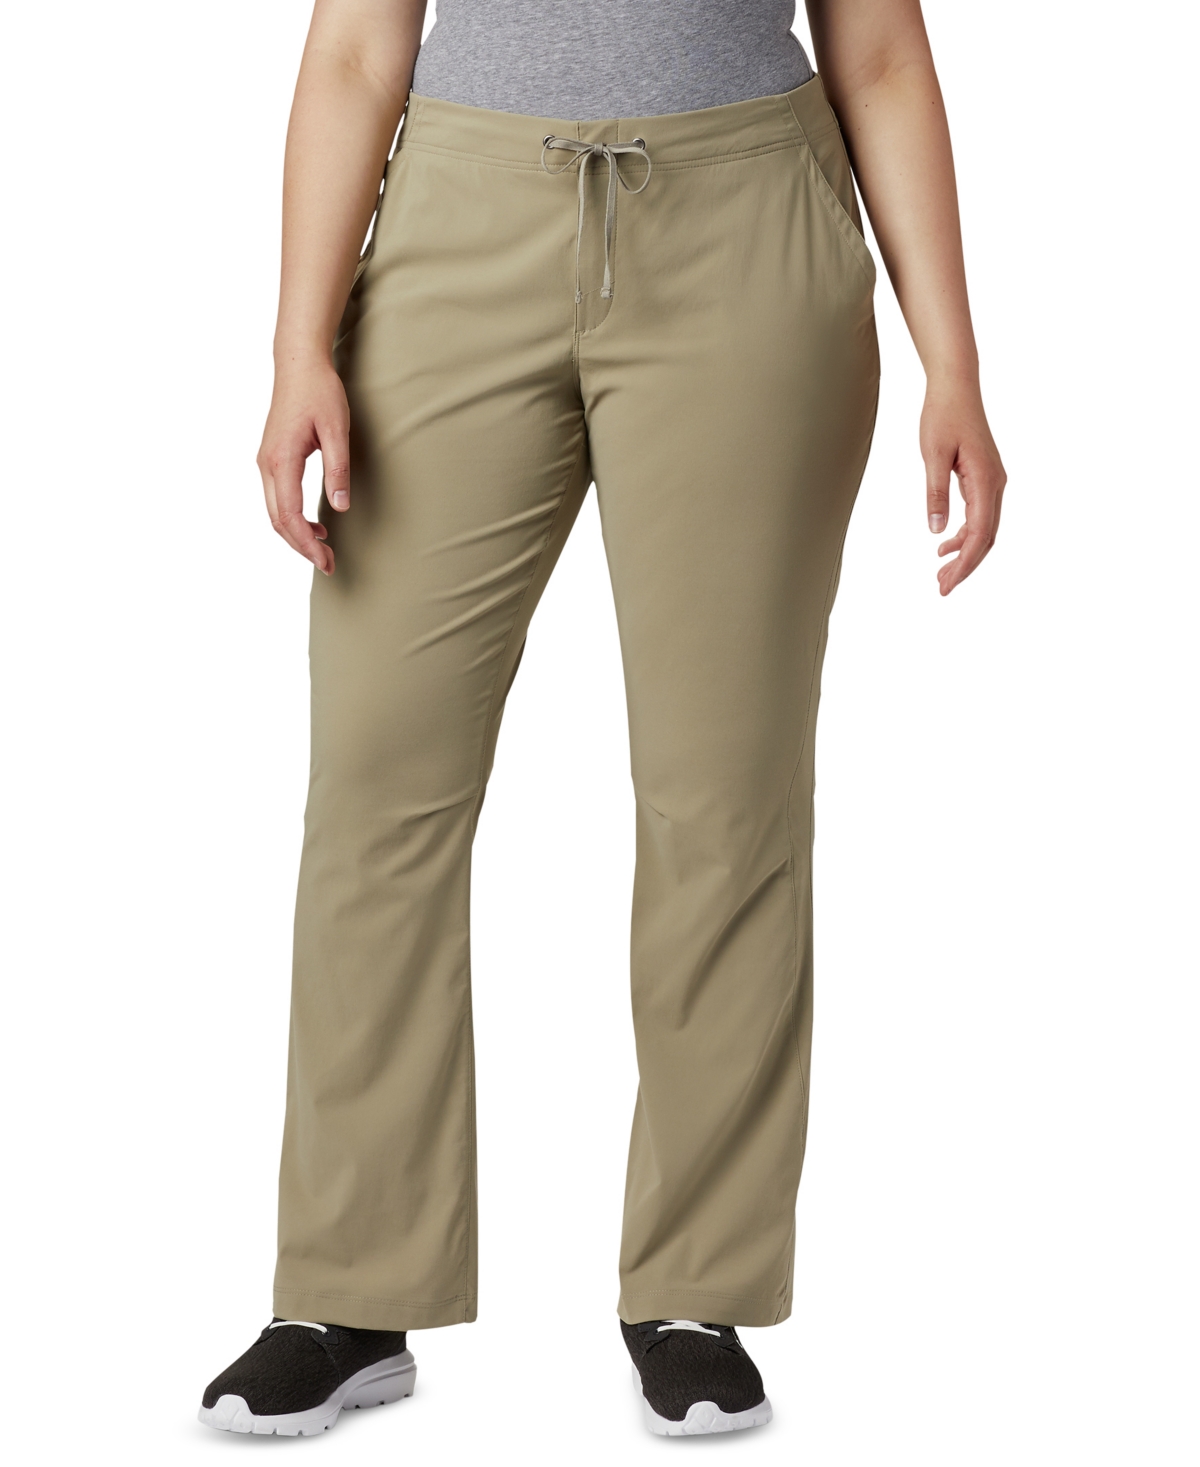 COLUMBIA PLUS SIZE ANYTIME OUTDOOR BOOTCUT PANTS